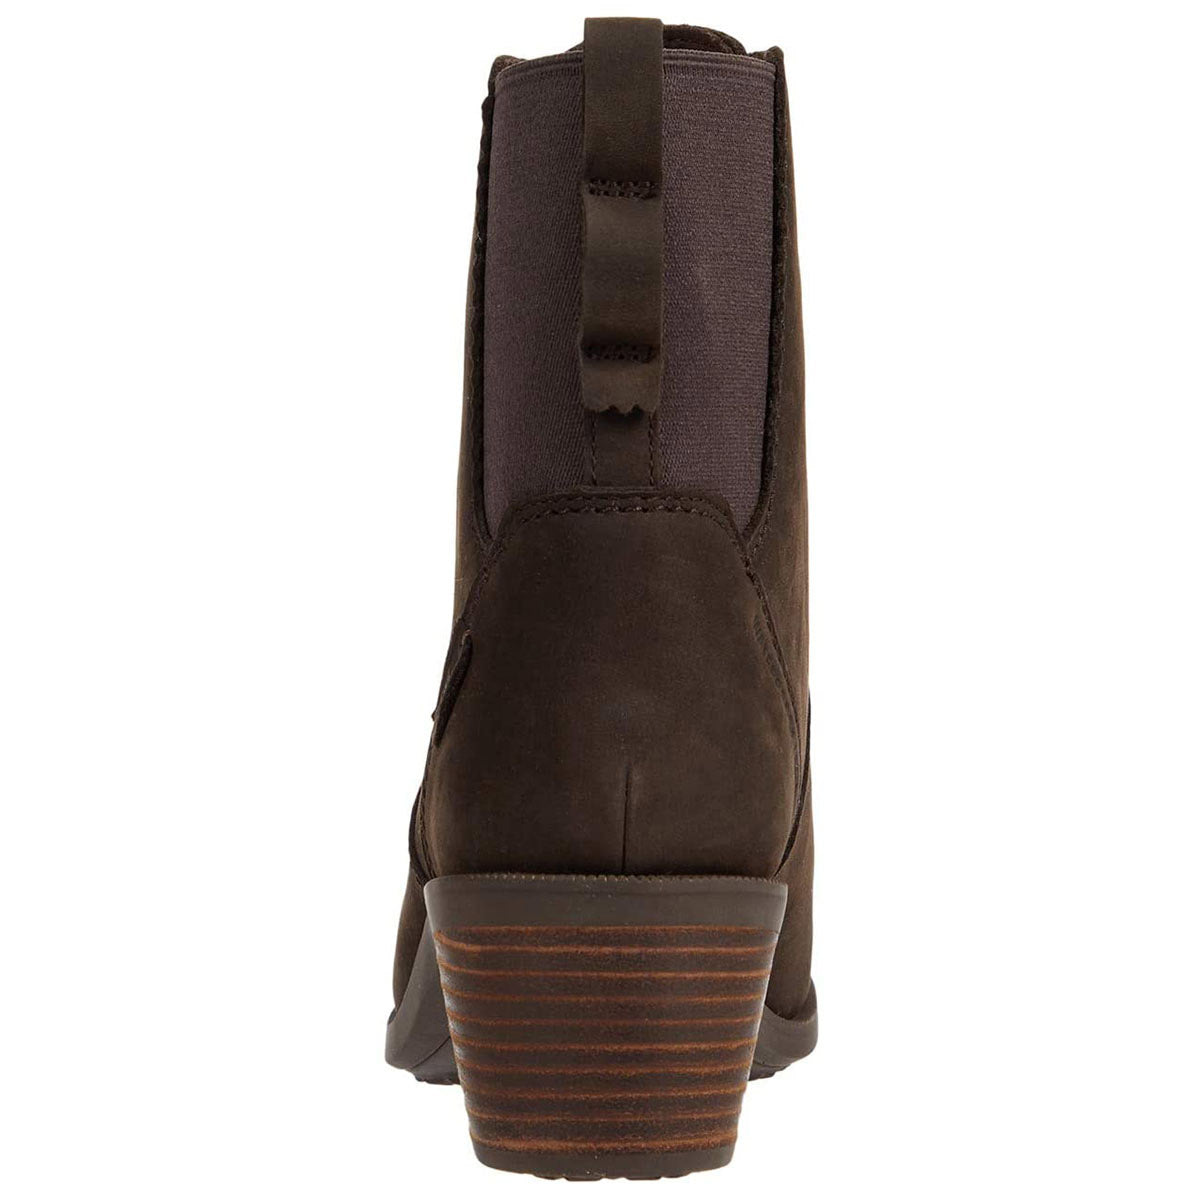 Rear view of a brown Teva Anaya Lace Up Chocolate-Womens boot with a block heel and elastic side panel.